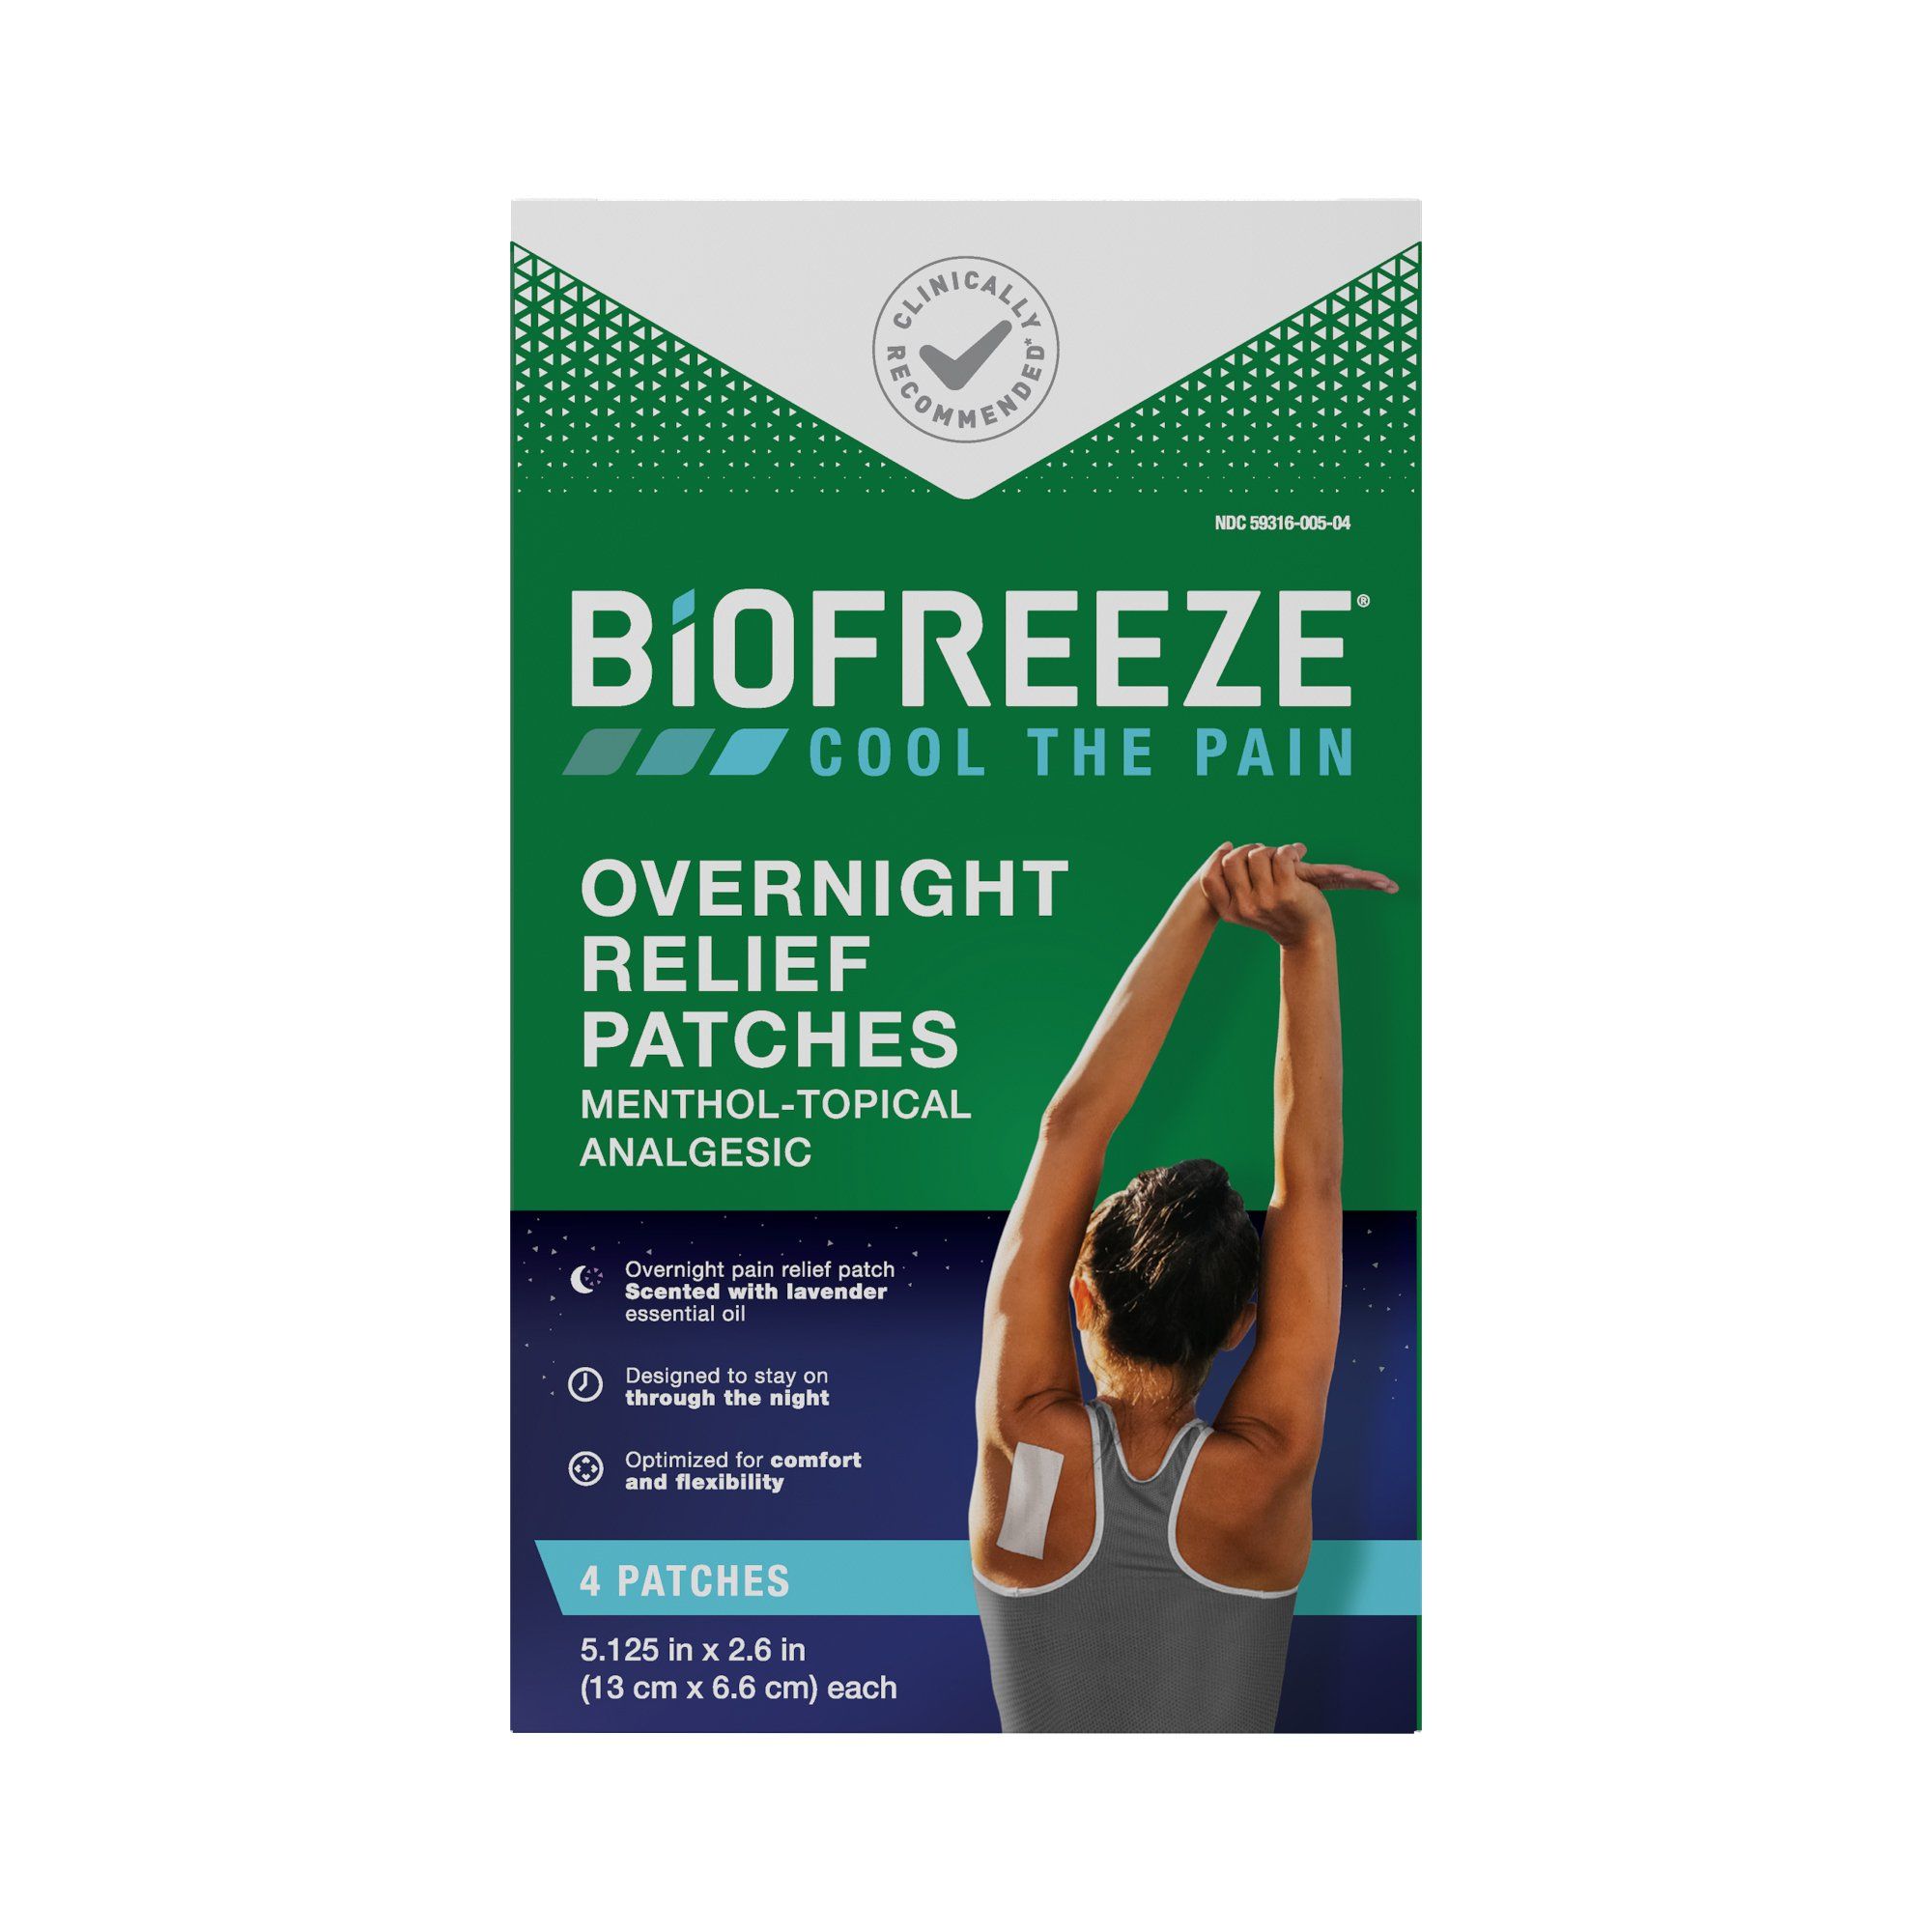 Biofreeze Topical Overnight Pain Relief Patches -  4 patches